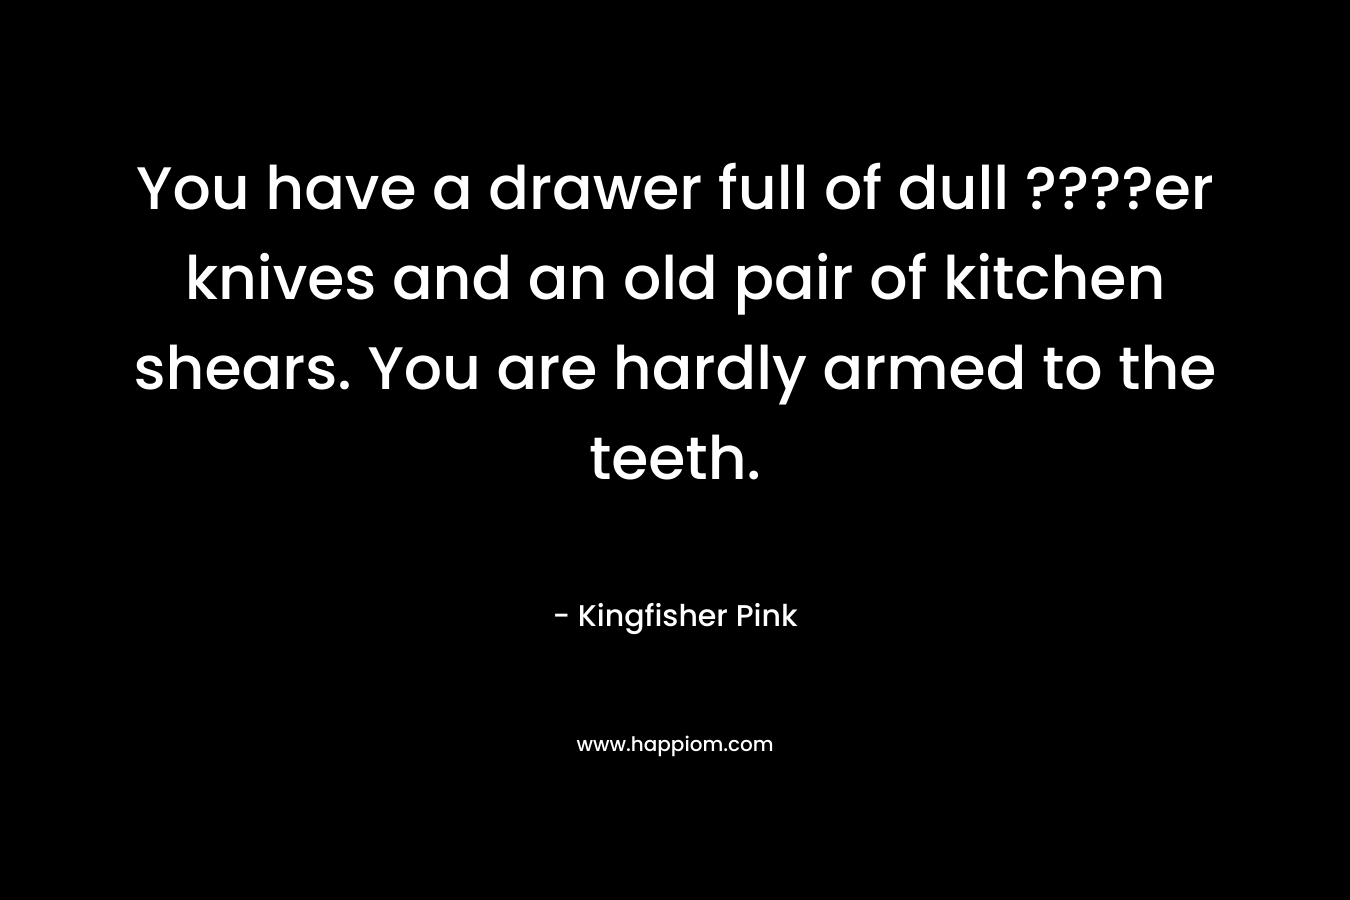 You have a drawer full of dull ????er knives and an old pair of kitchen shears. You are hardly armed to the teeth.